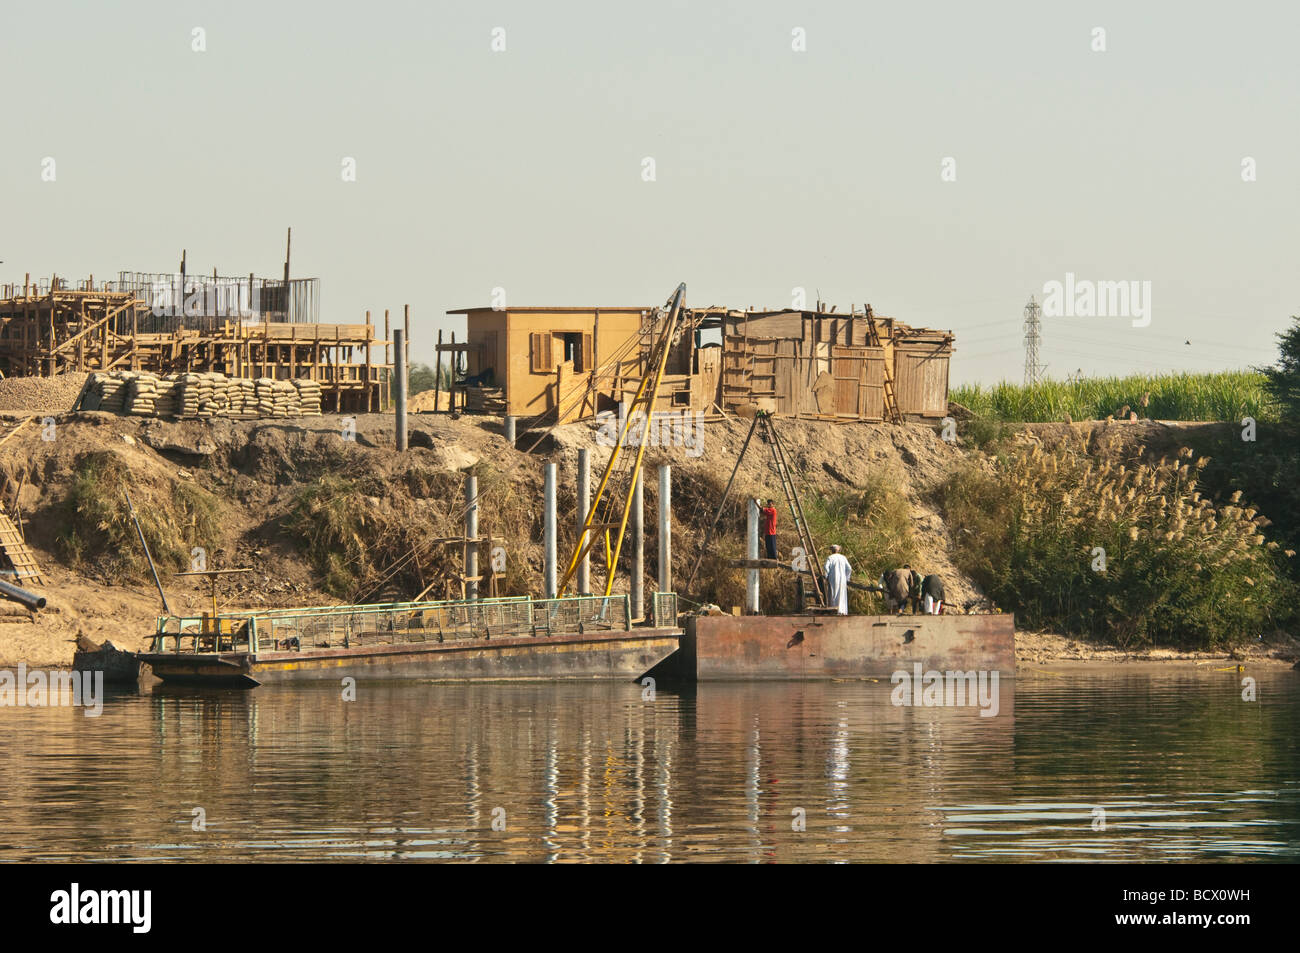 Egypt Kom Ombo Nile River barge and building Stock Photo